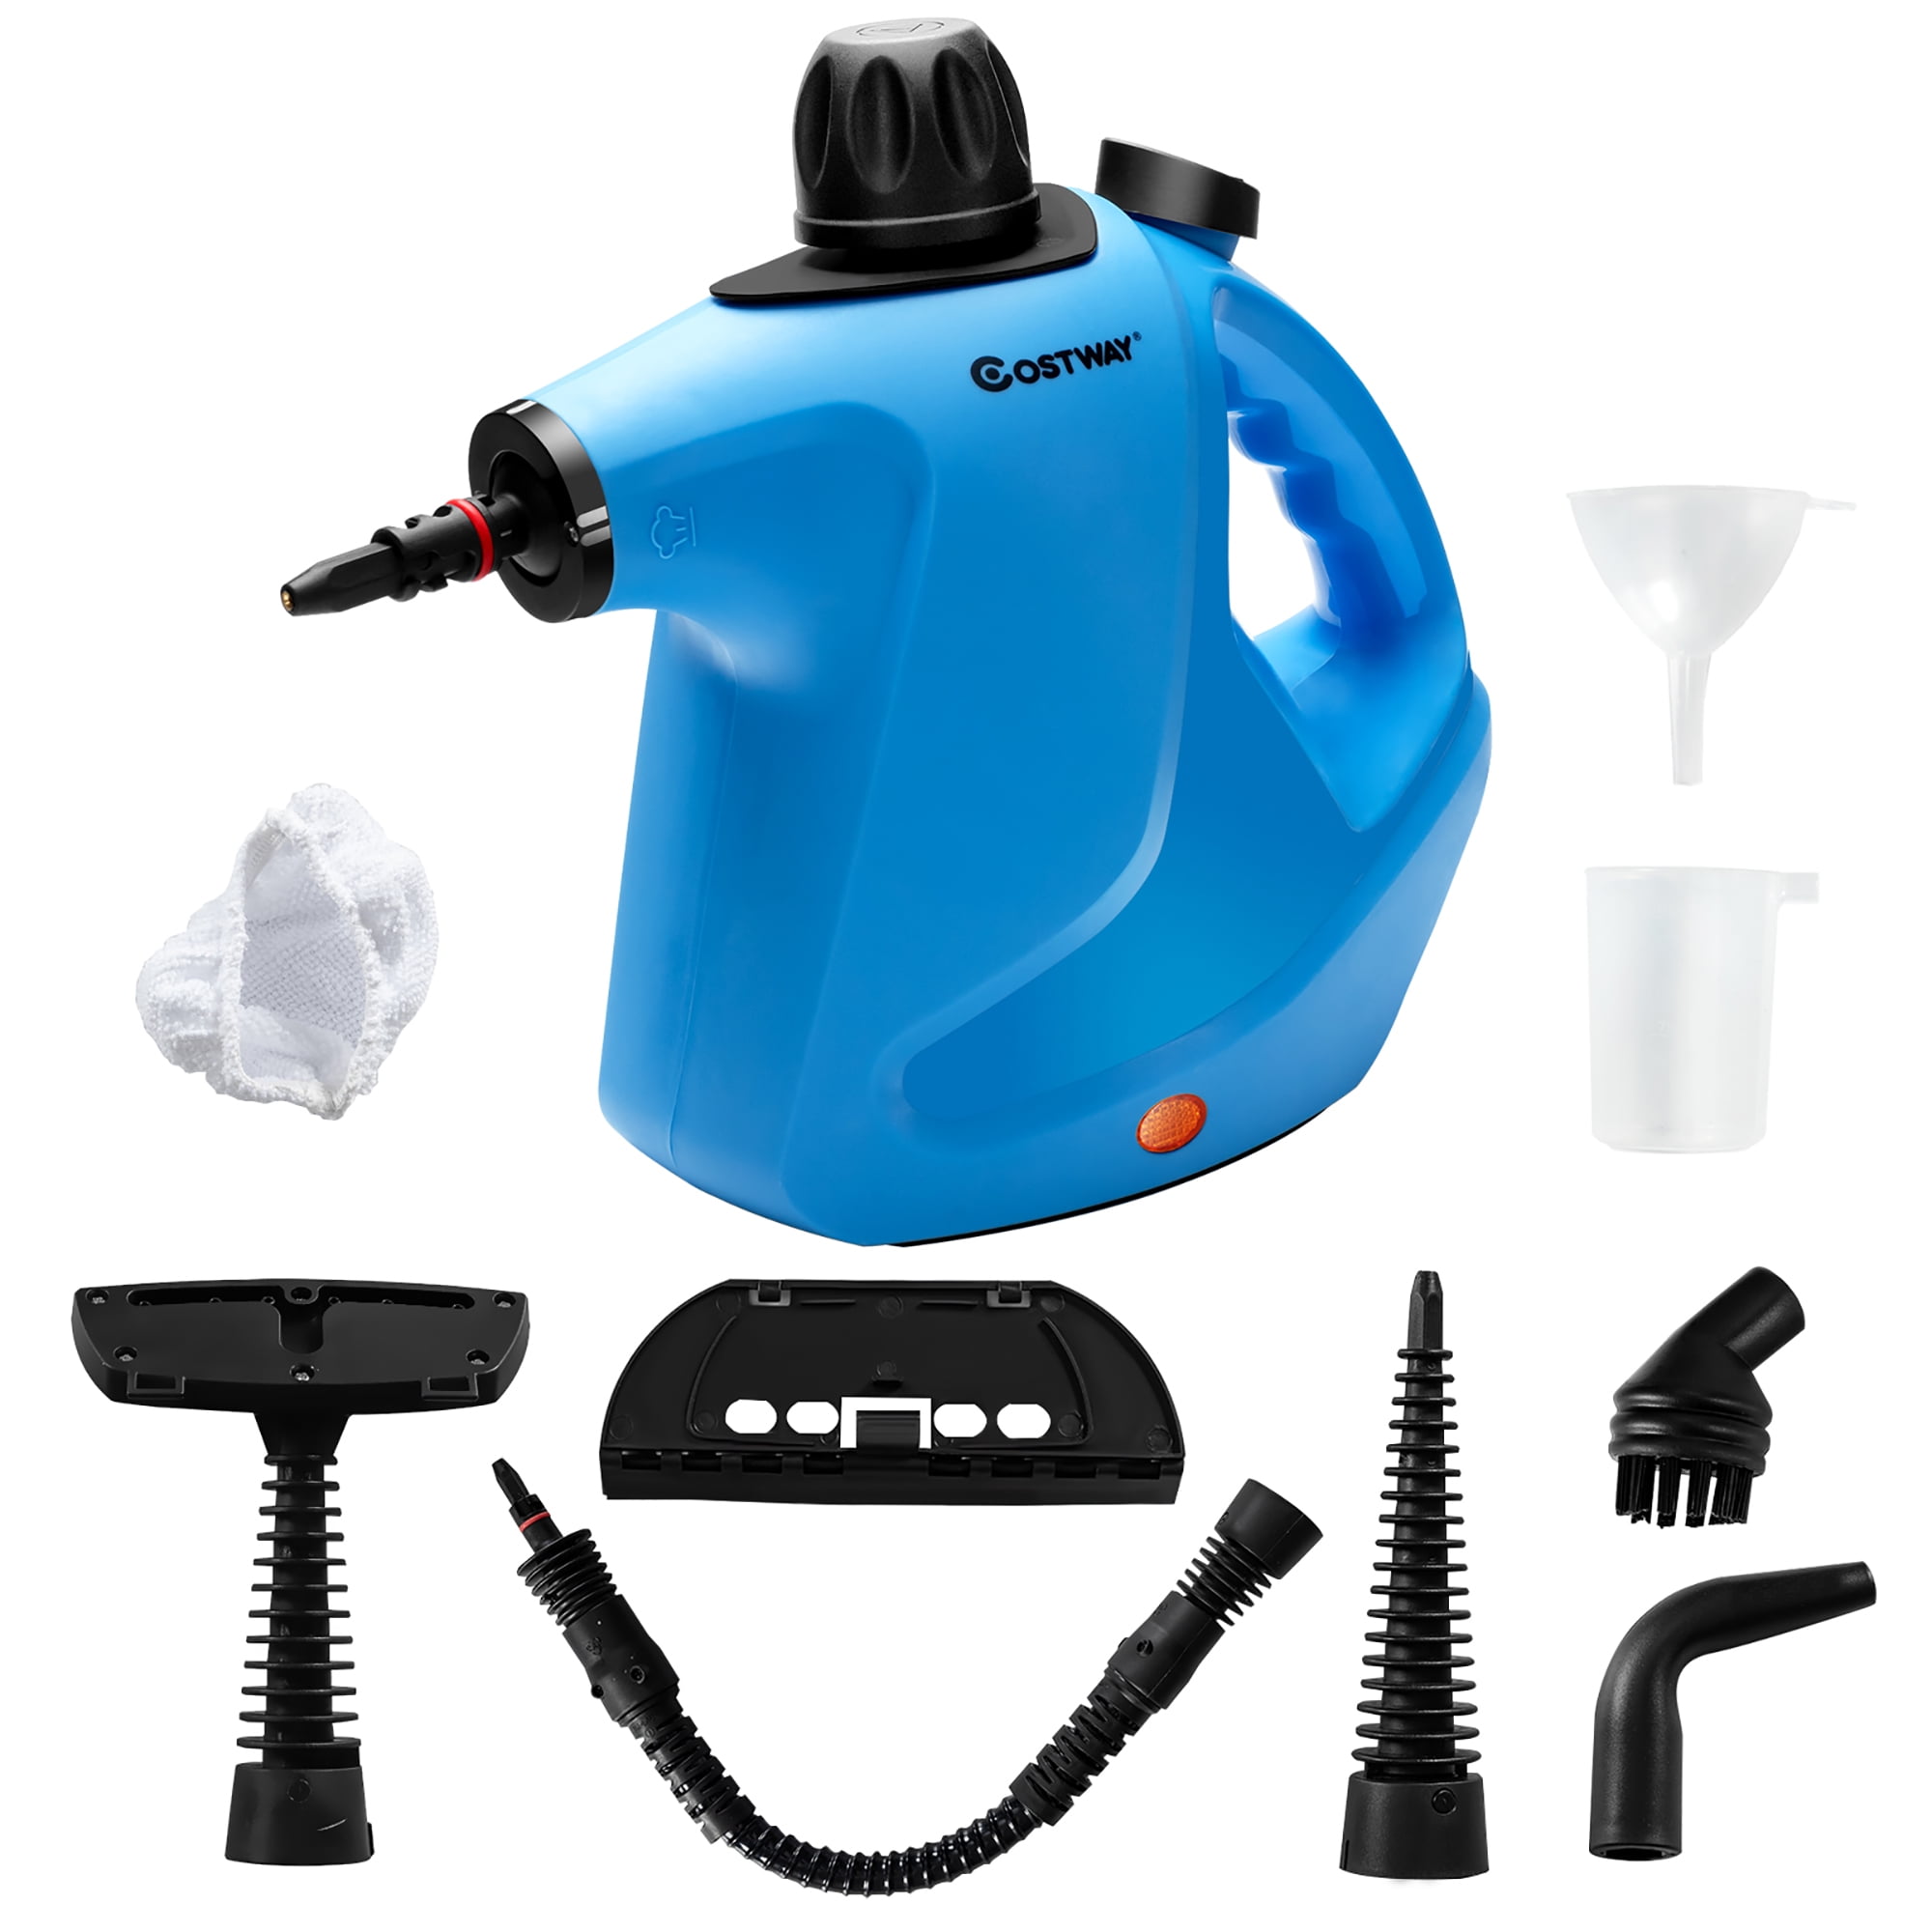 Patio Auto Handheld Pressurized Steam Cleaner with 9-Piece Accessory Set Multi-Purpose and Multi-Surface All Natural Chemical-Free Steam Cleaning for Home More